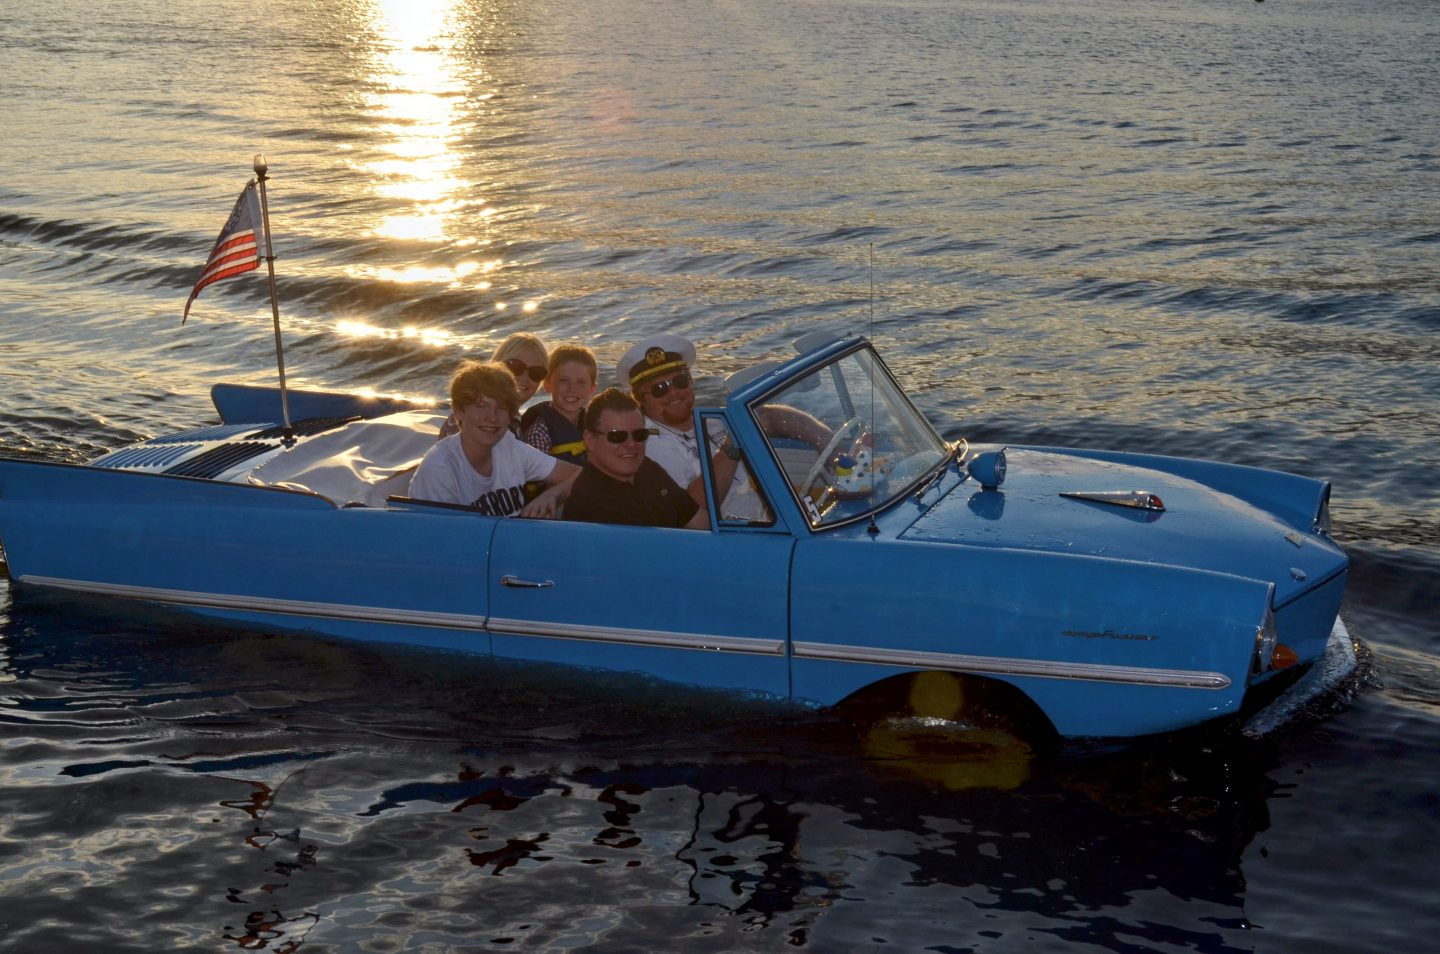 The Amphicars At Downtown Disney